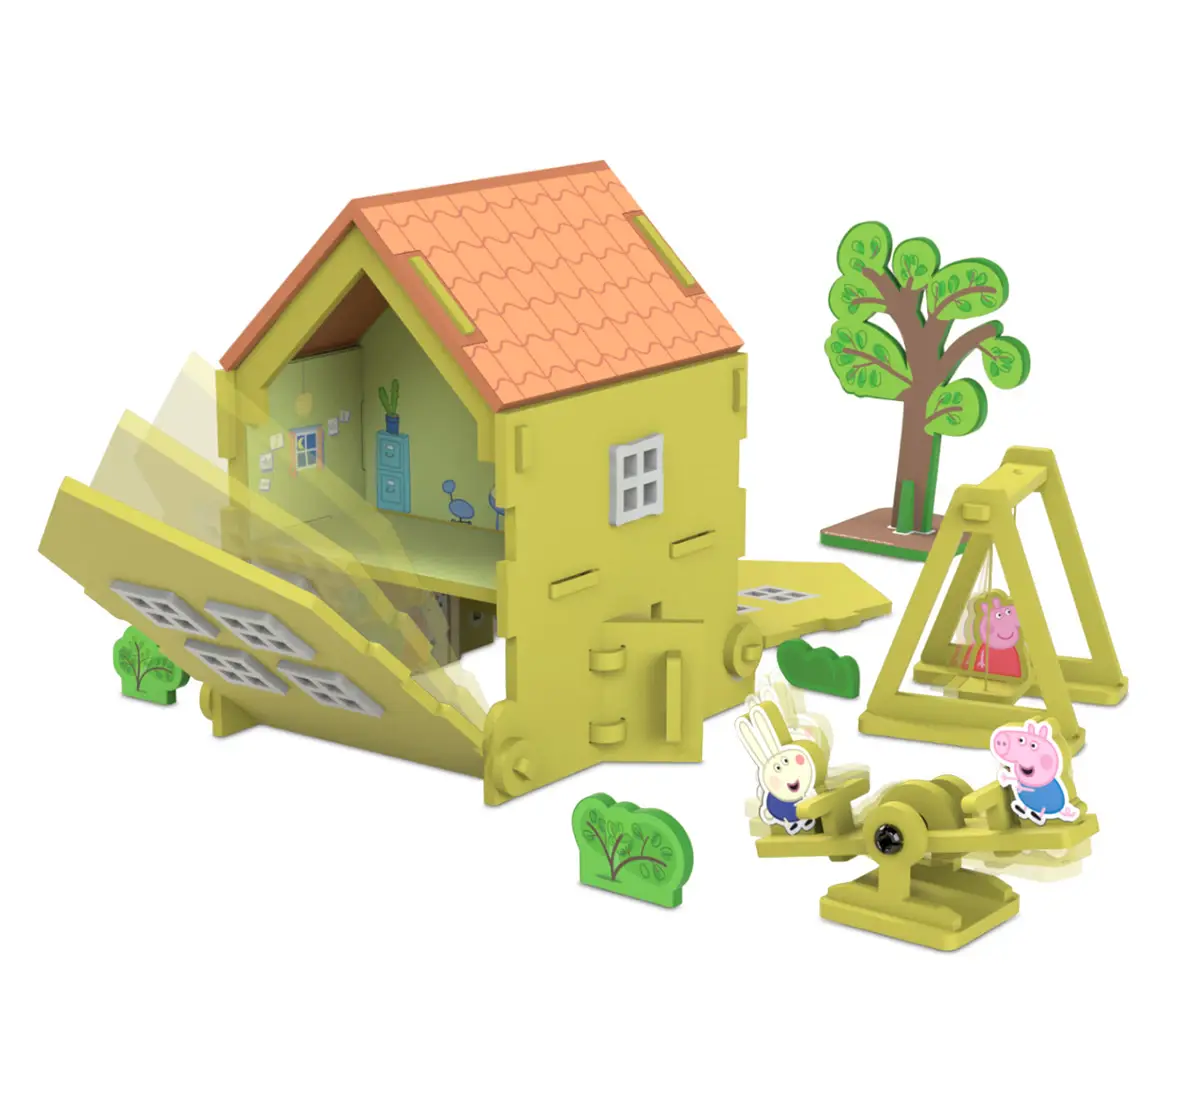 Li'l Wizards 3D Build N' Play Peppa Pig House Set For Kids of Age 3Y+, Multicolour